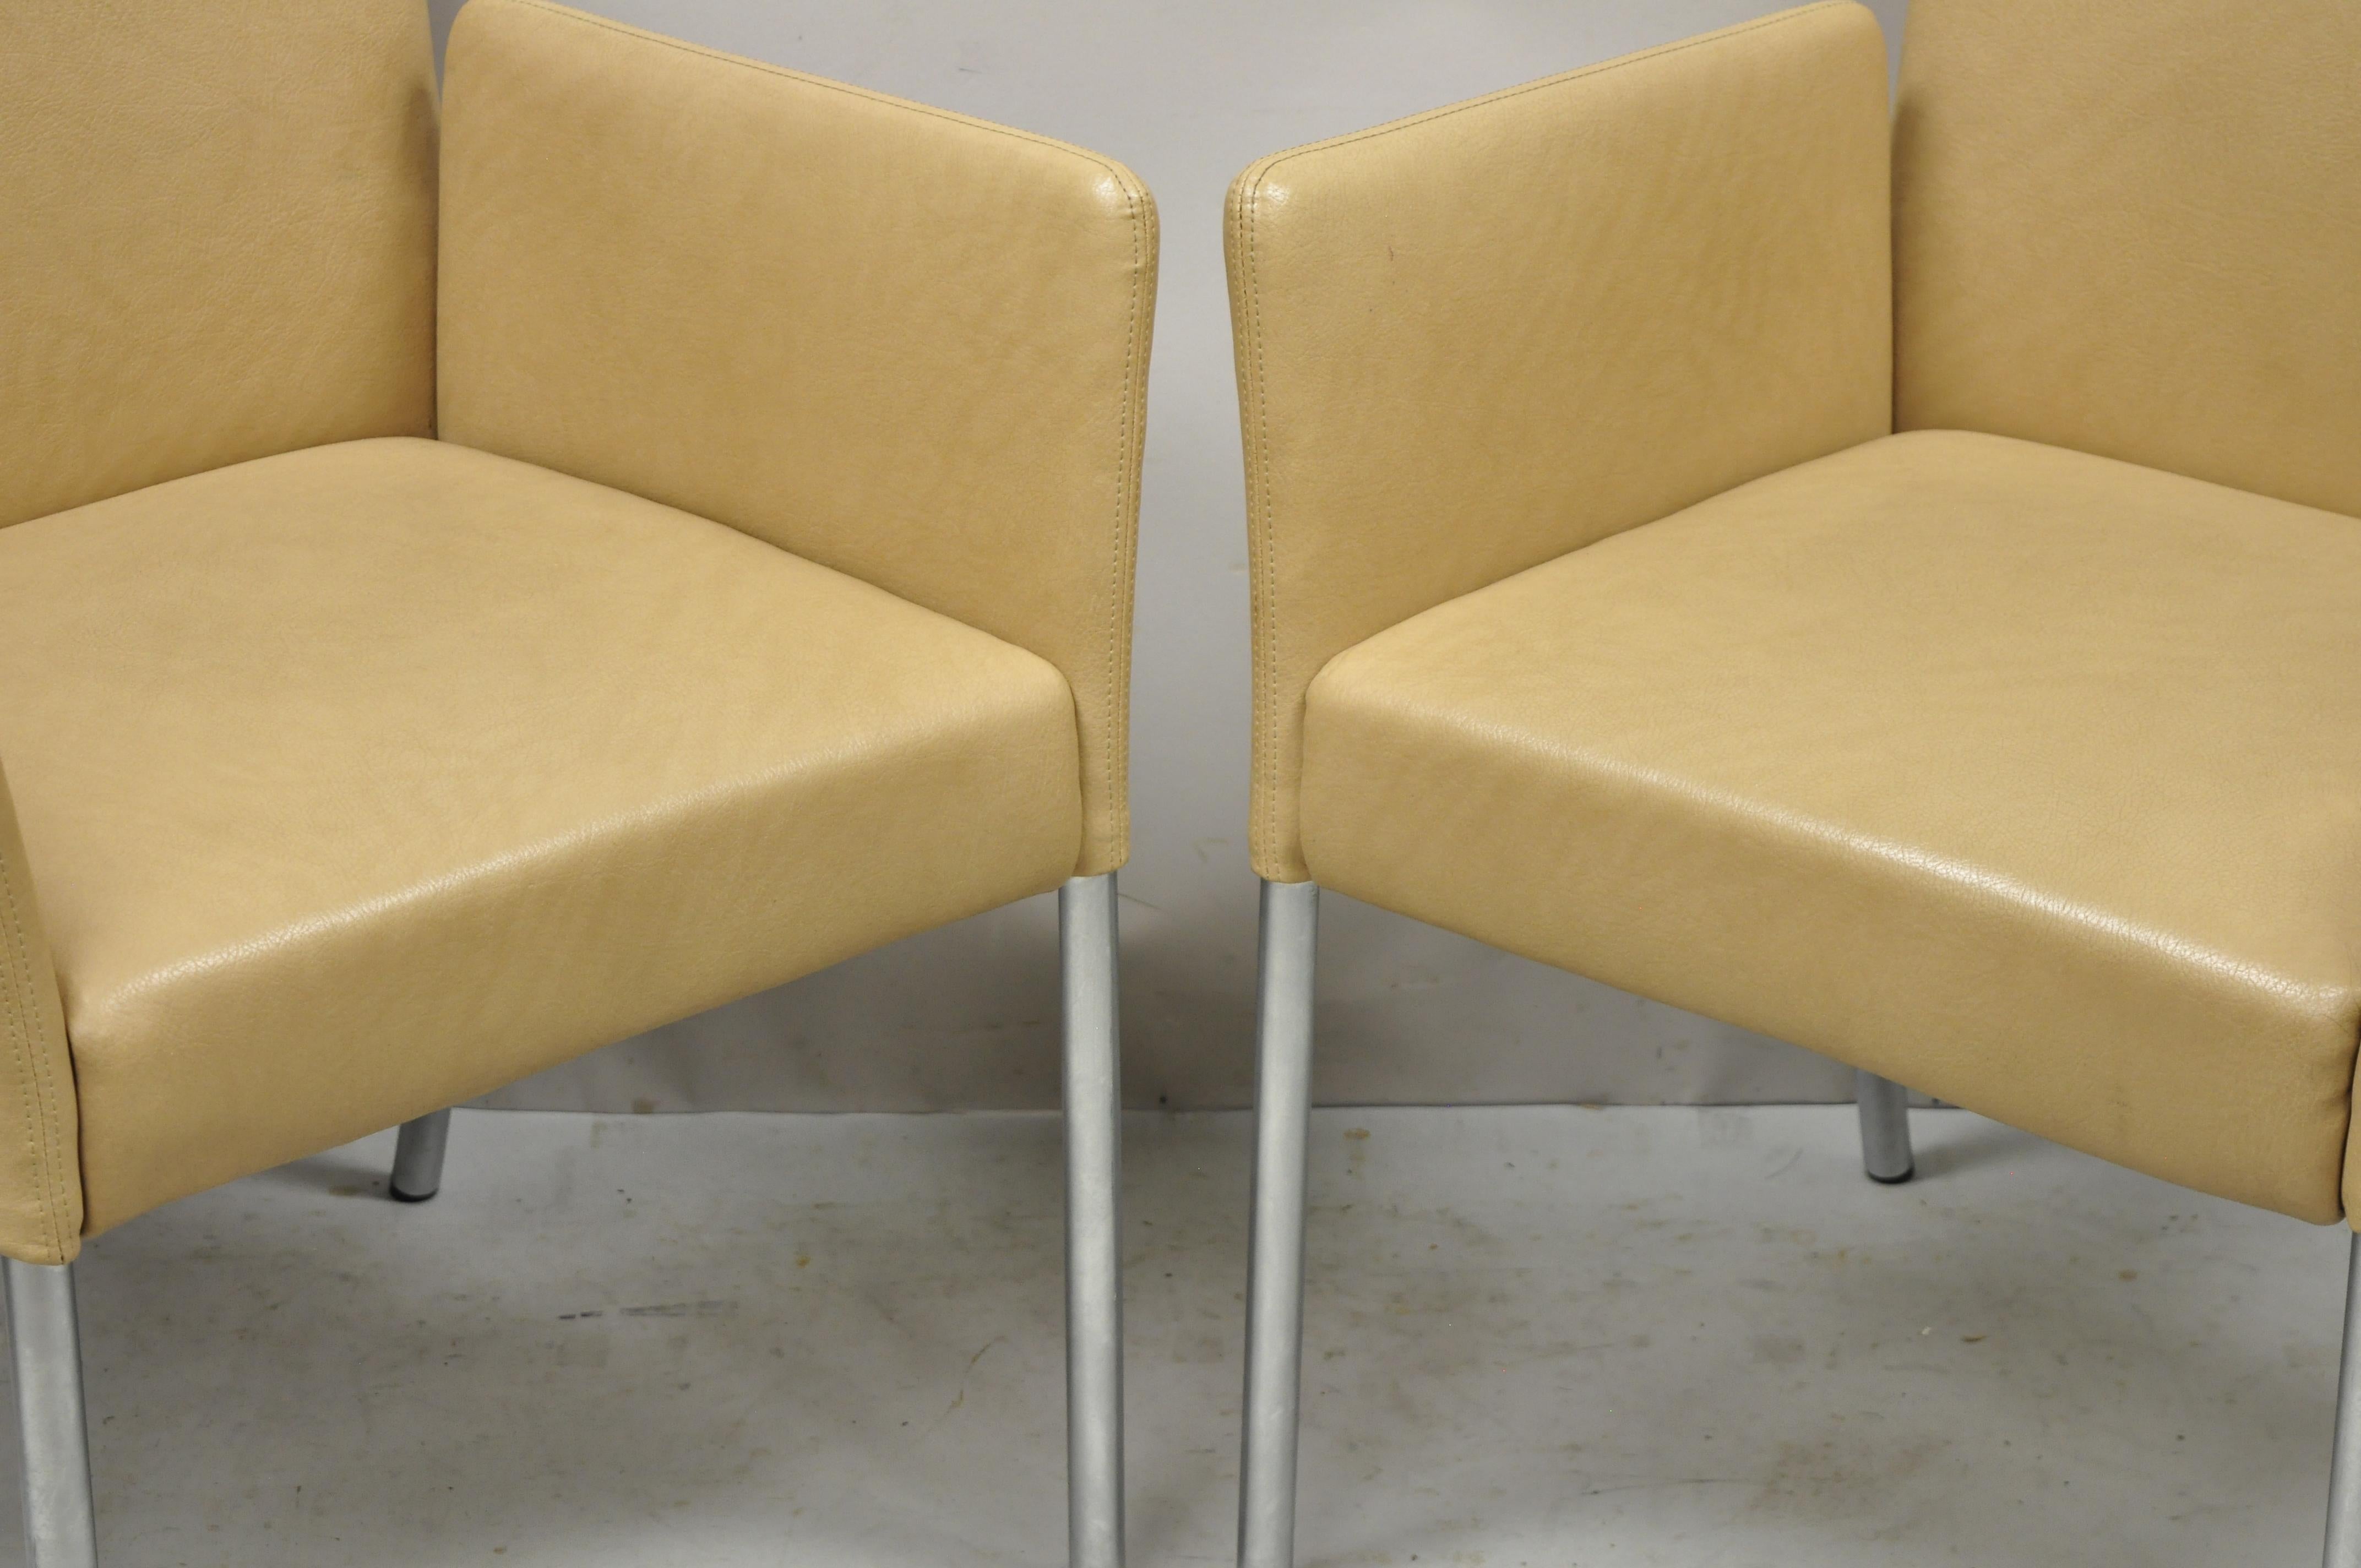 Contemporary Coalesce Steelcase Beige Leather Model 1510 Switch Guest Arm Chair 'A', a Pair For Sale